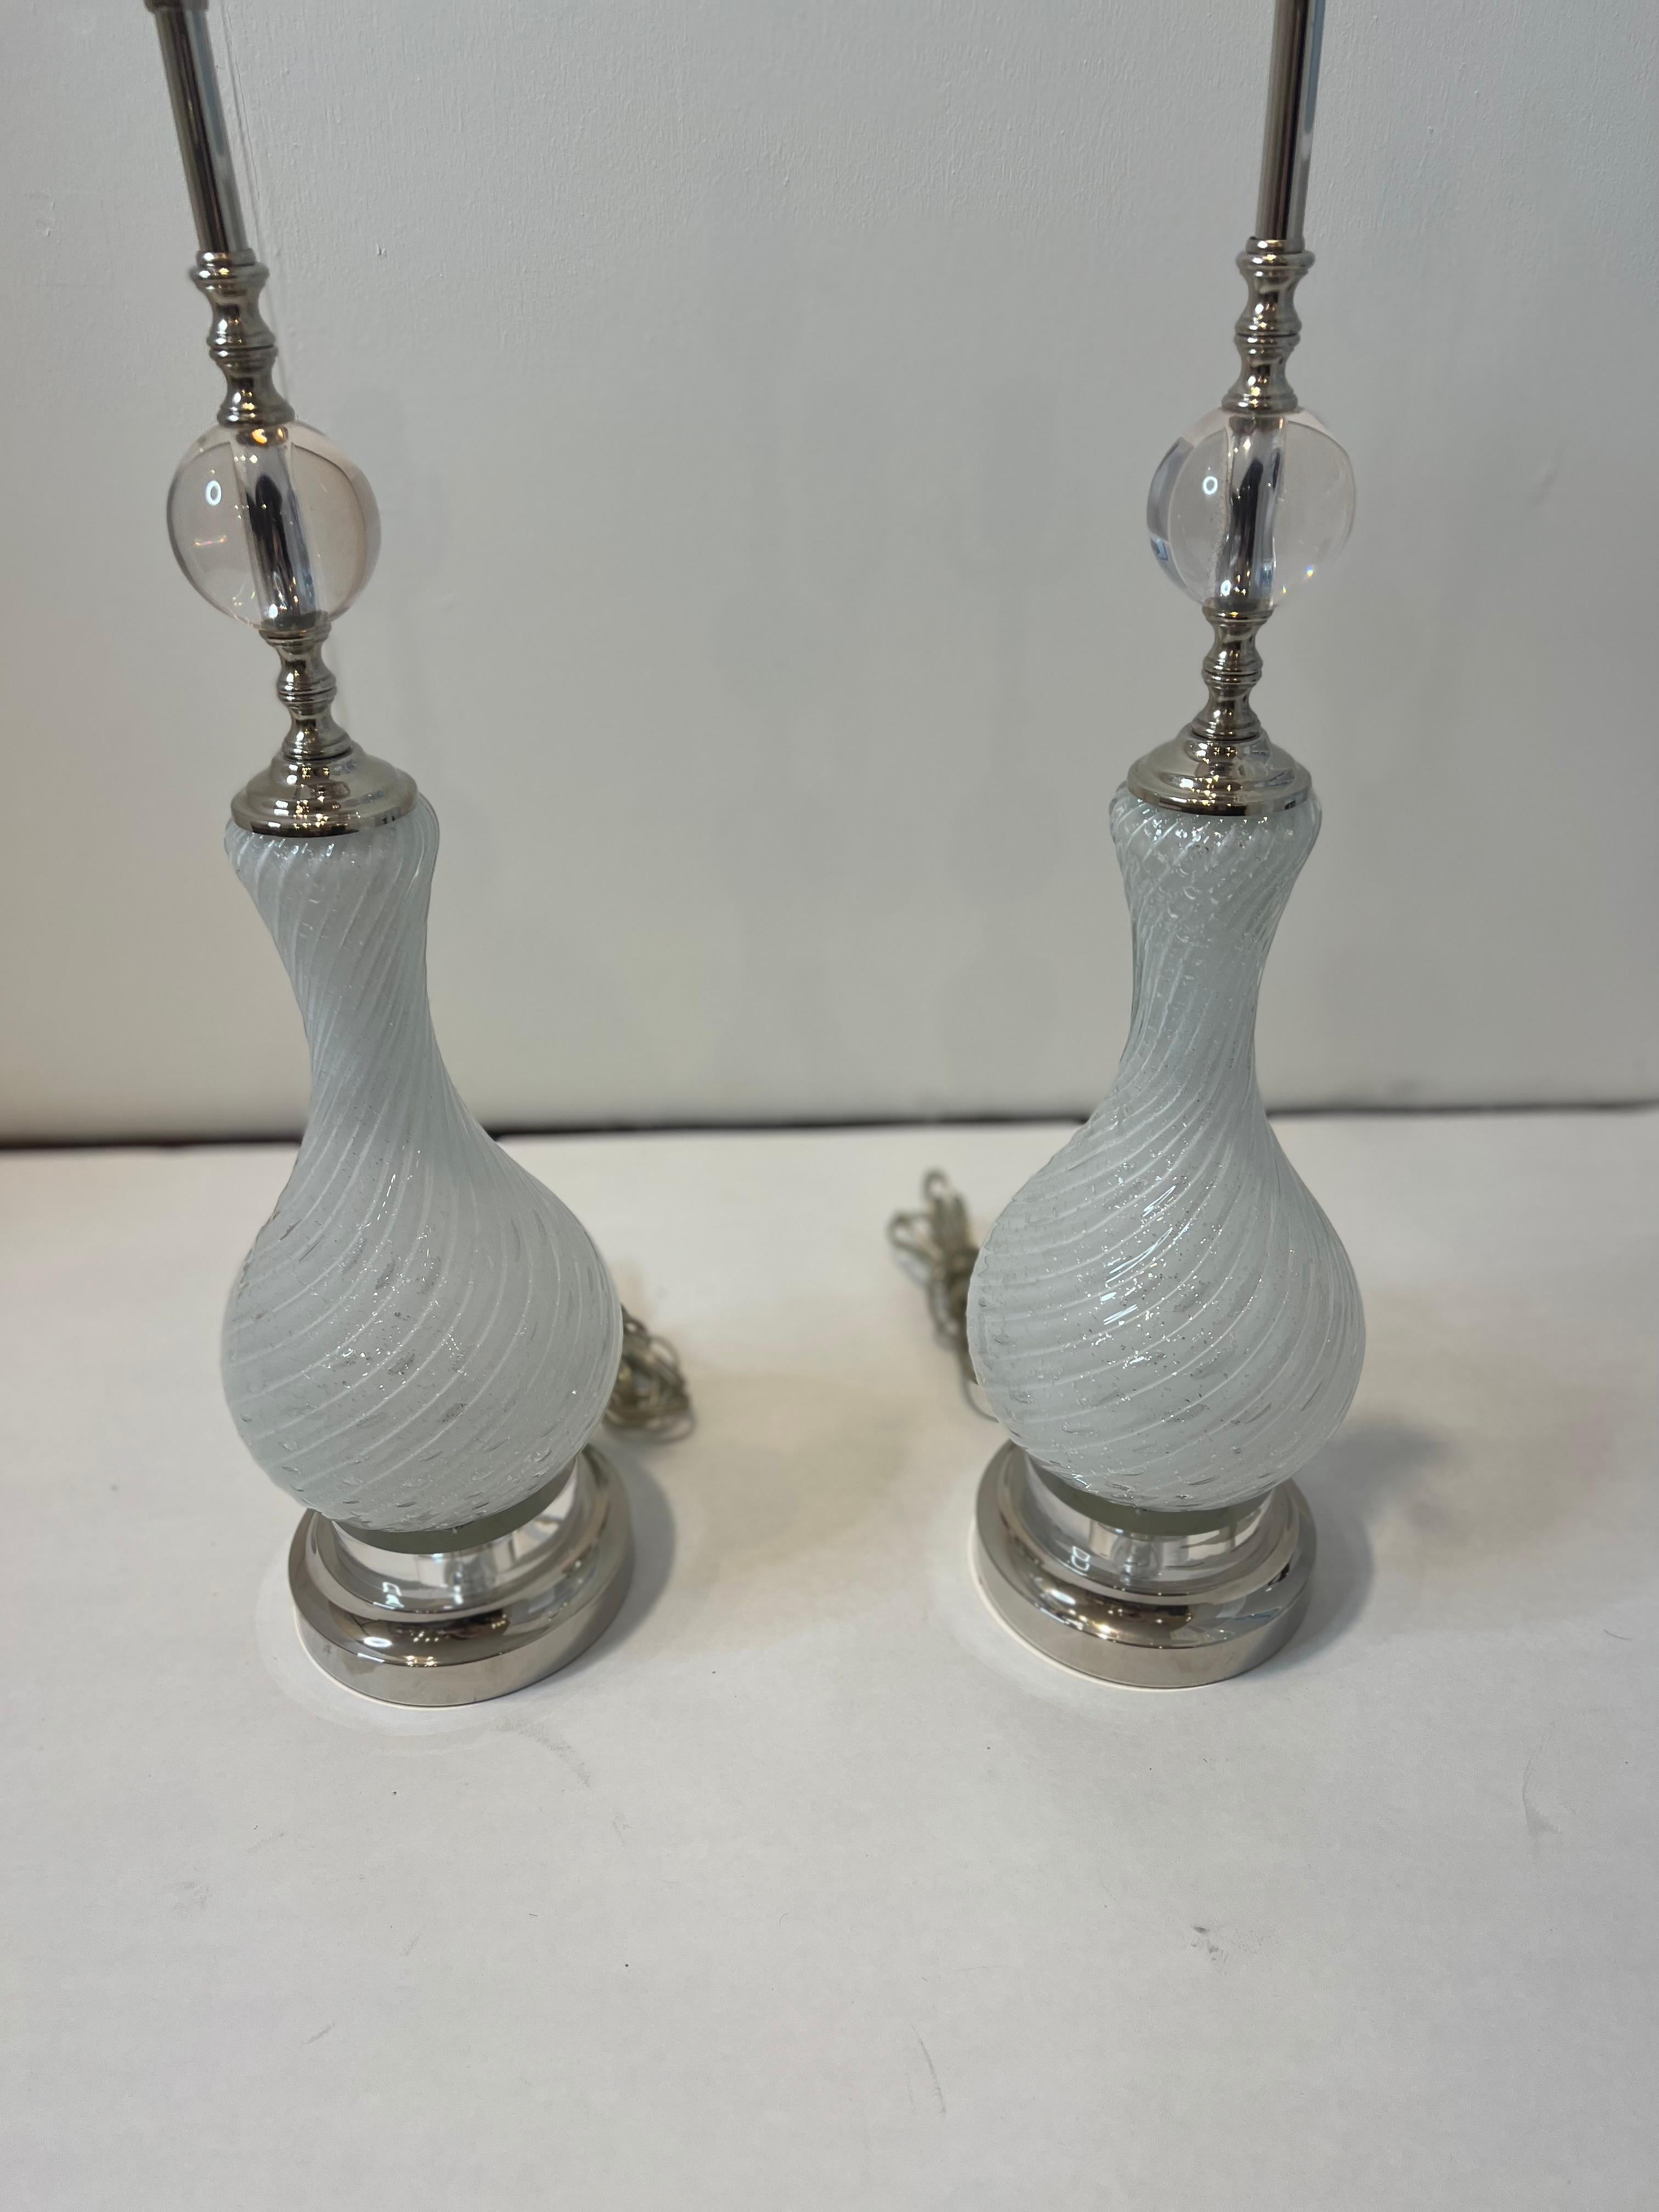 Rare Pair of Vintage Italian Silver Murano Lamps with chrome and Lucite. Newly rewired in great condition very rare find. Base of lamp is 5.5D.